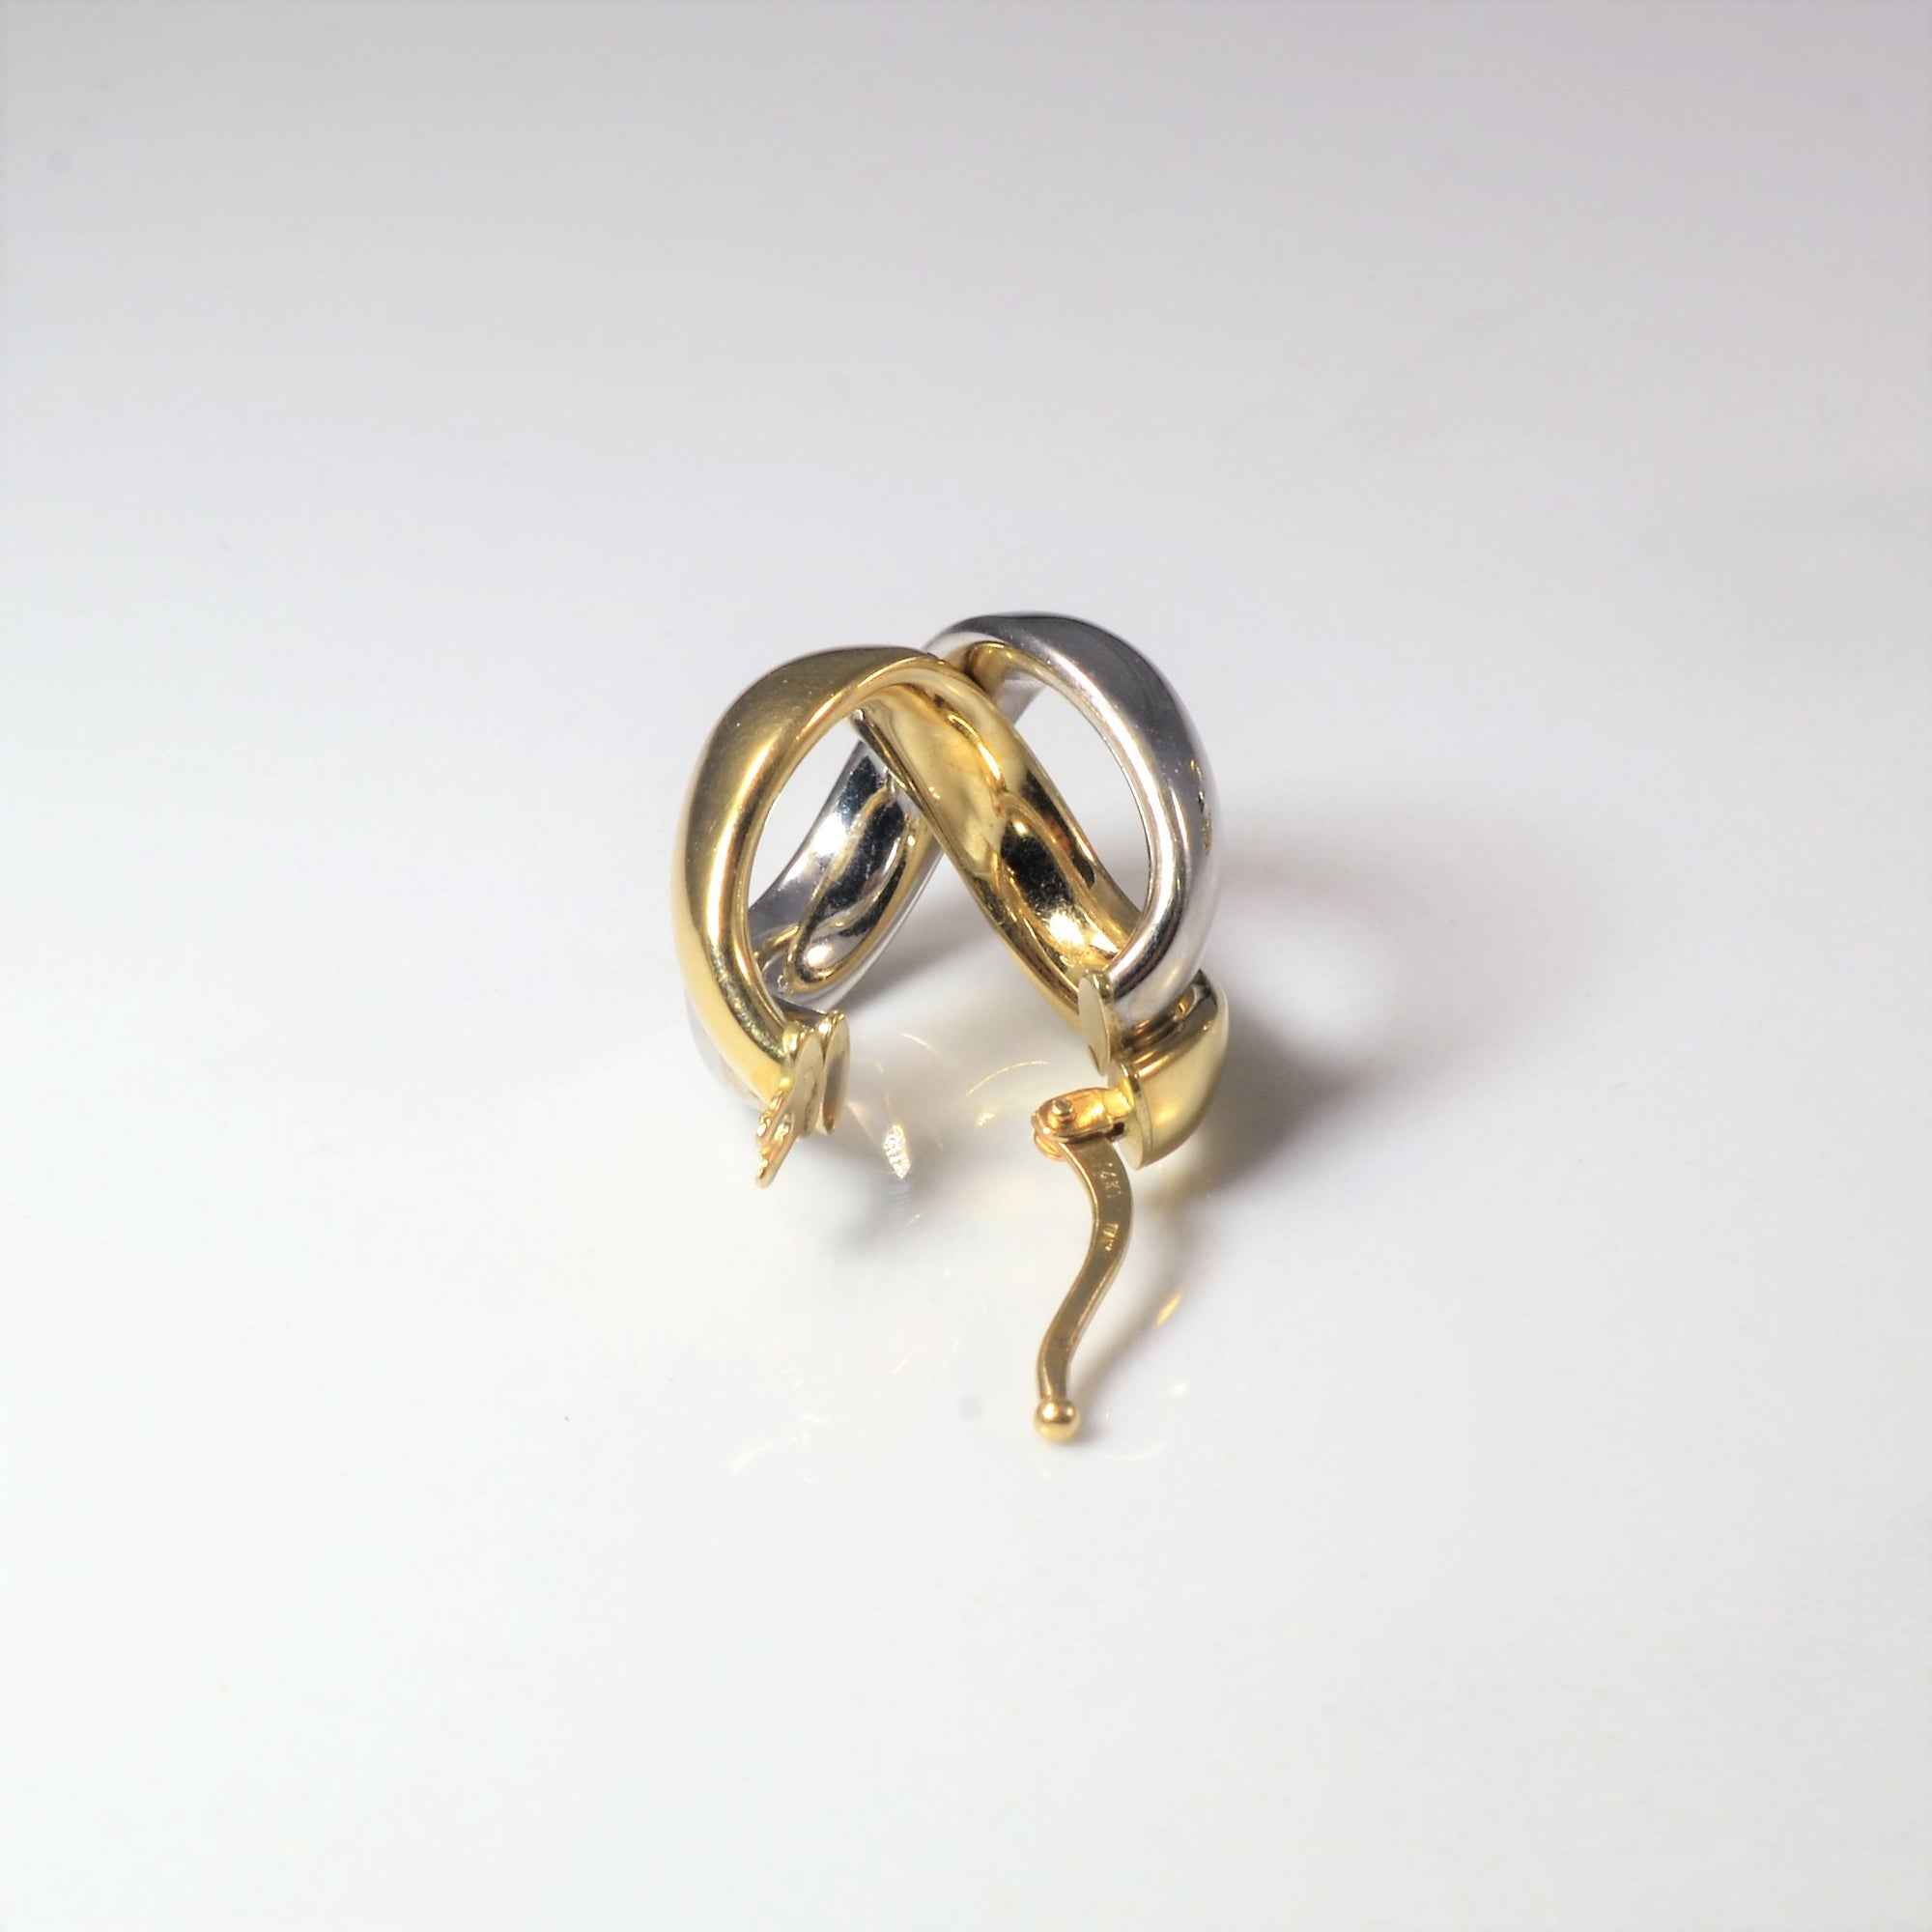 Bypass Two Tone Gold Huggie Earrings |